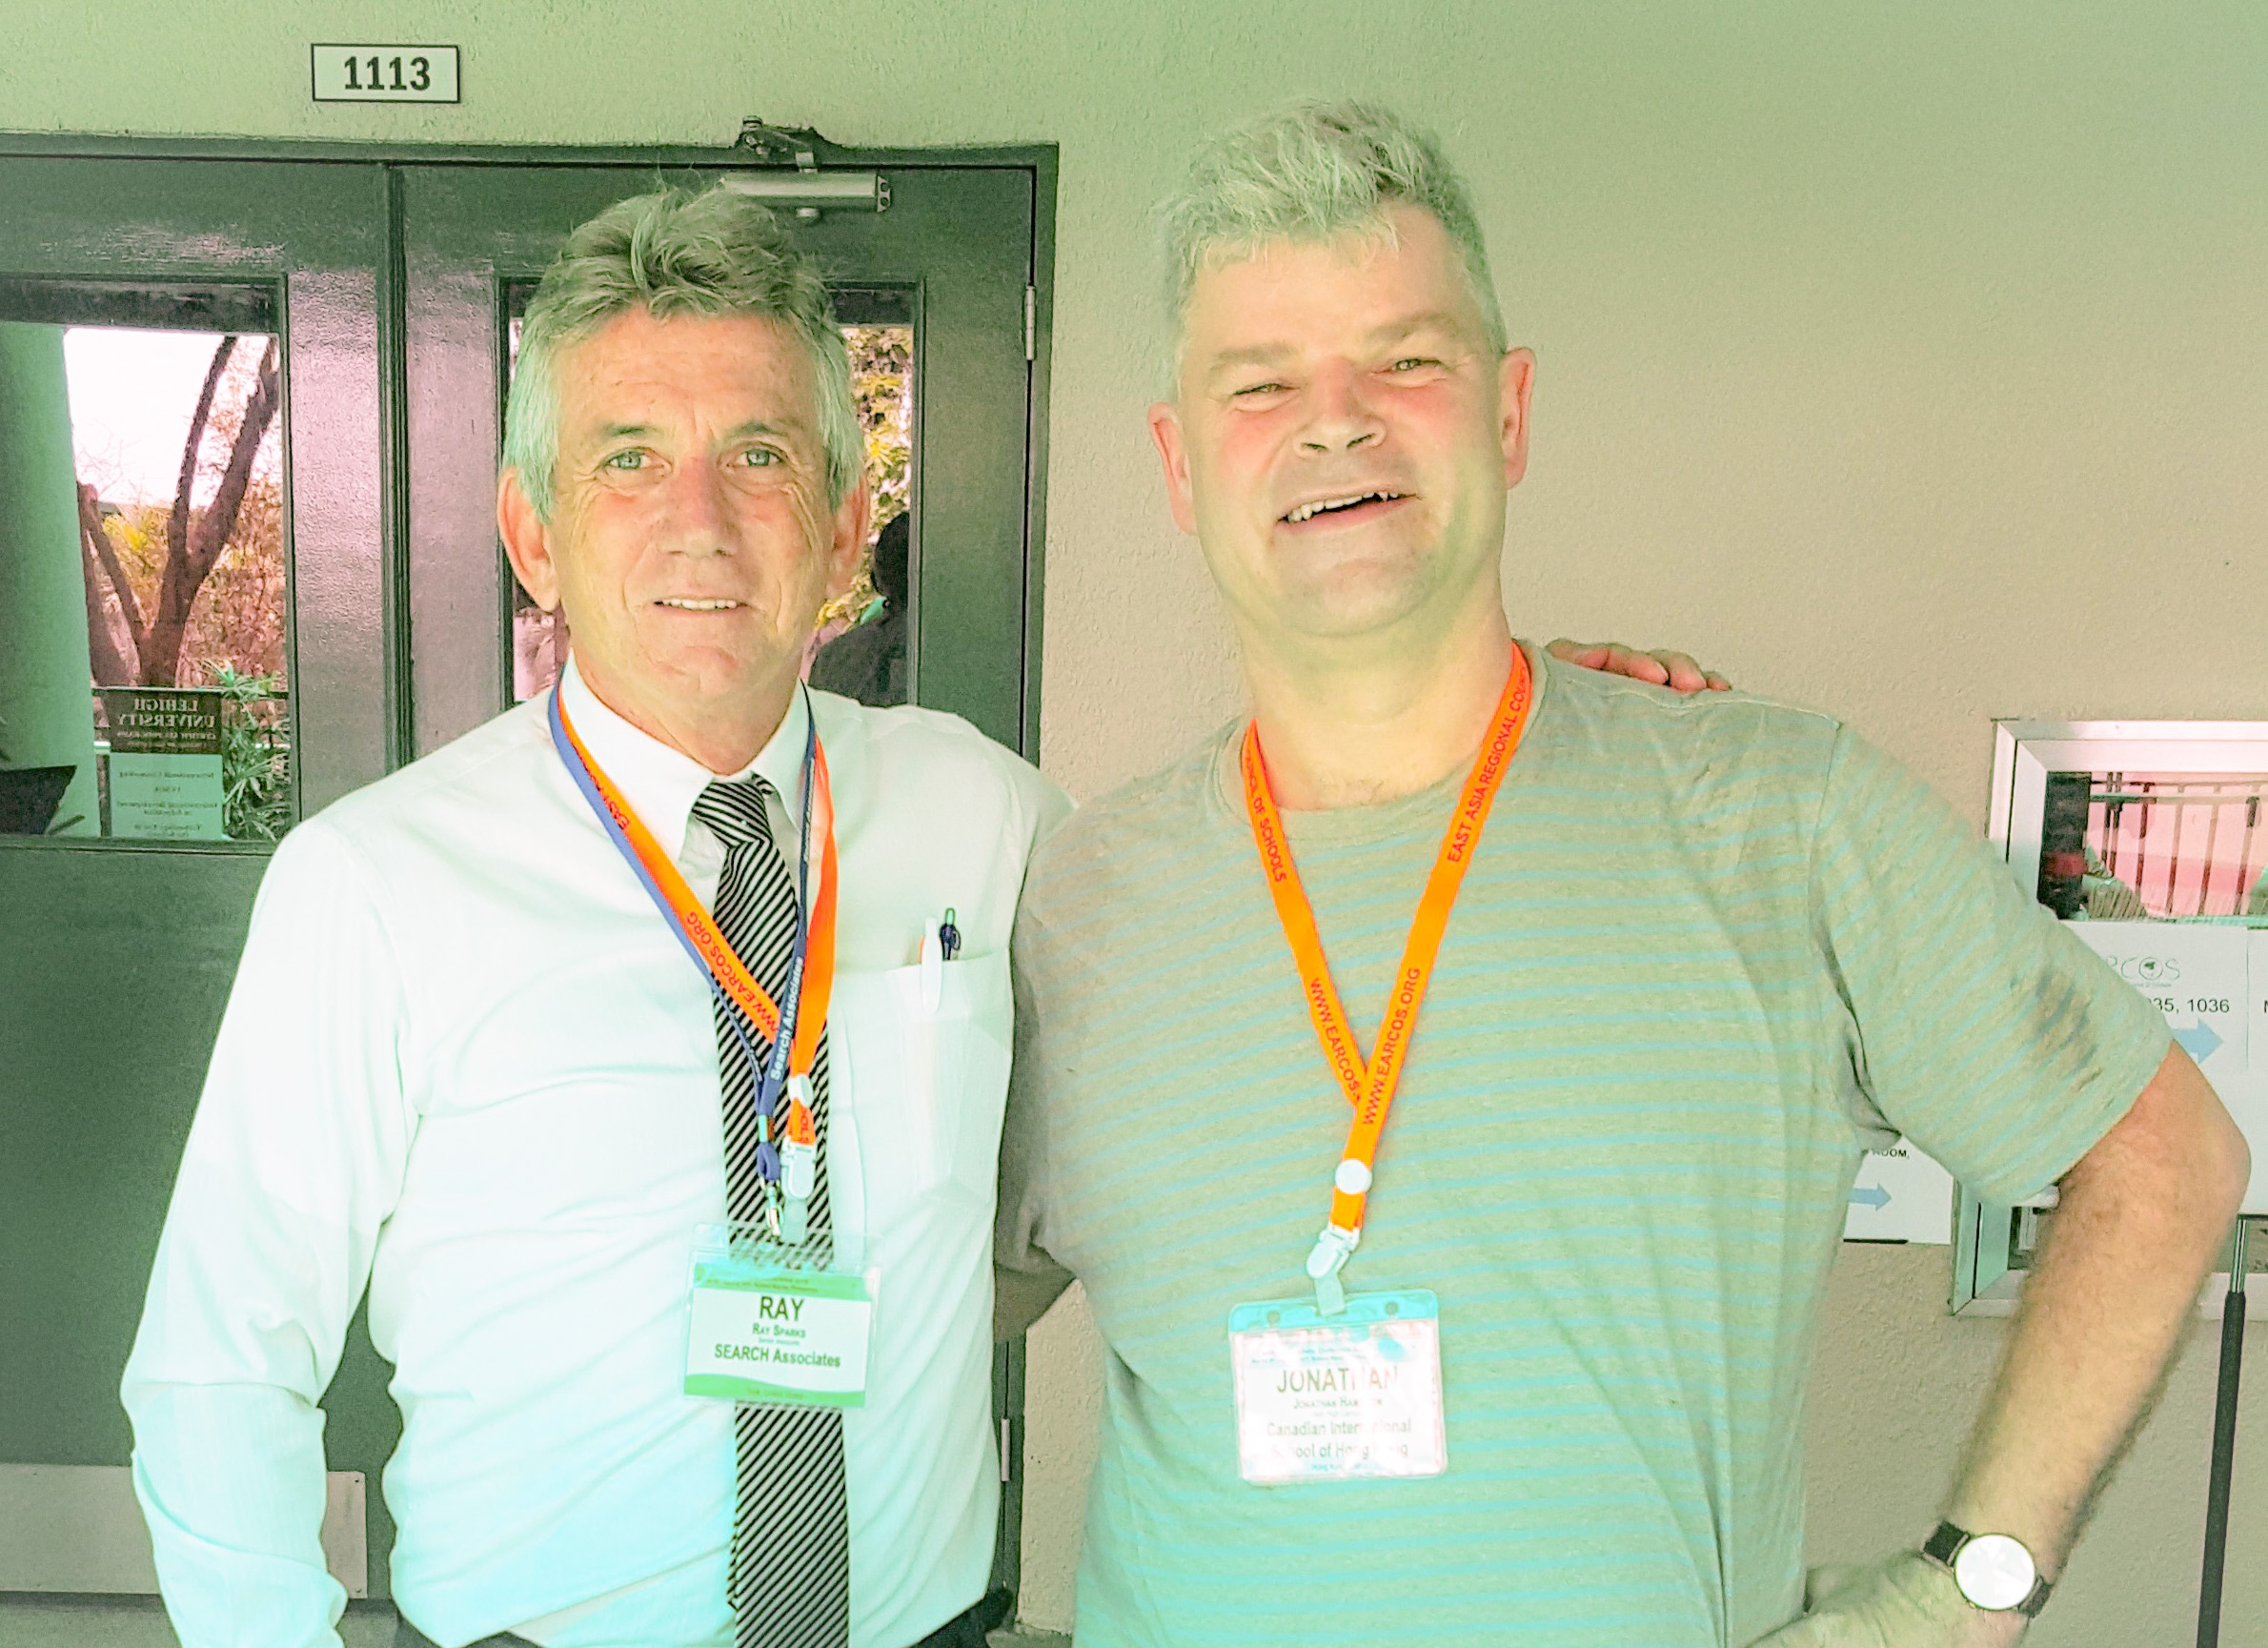 From left: Ray Sparks with former candidate Jonathan Hamilton from the Canadian International School Hong Kong